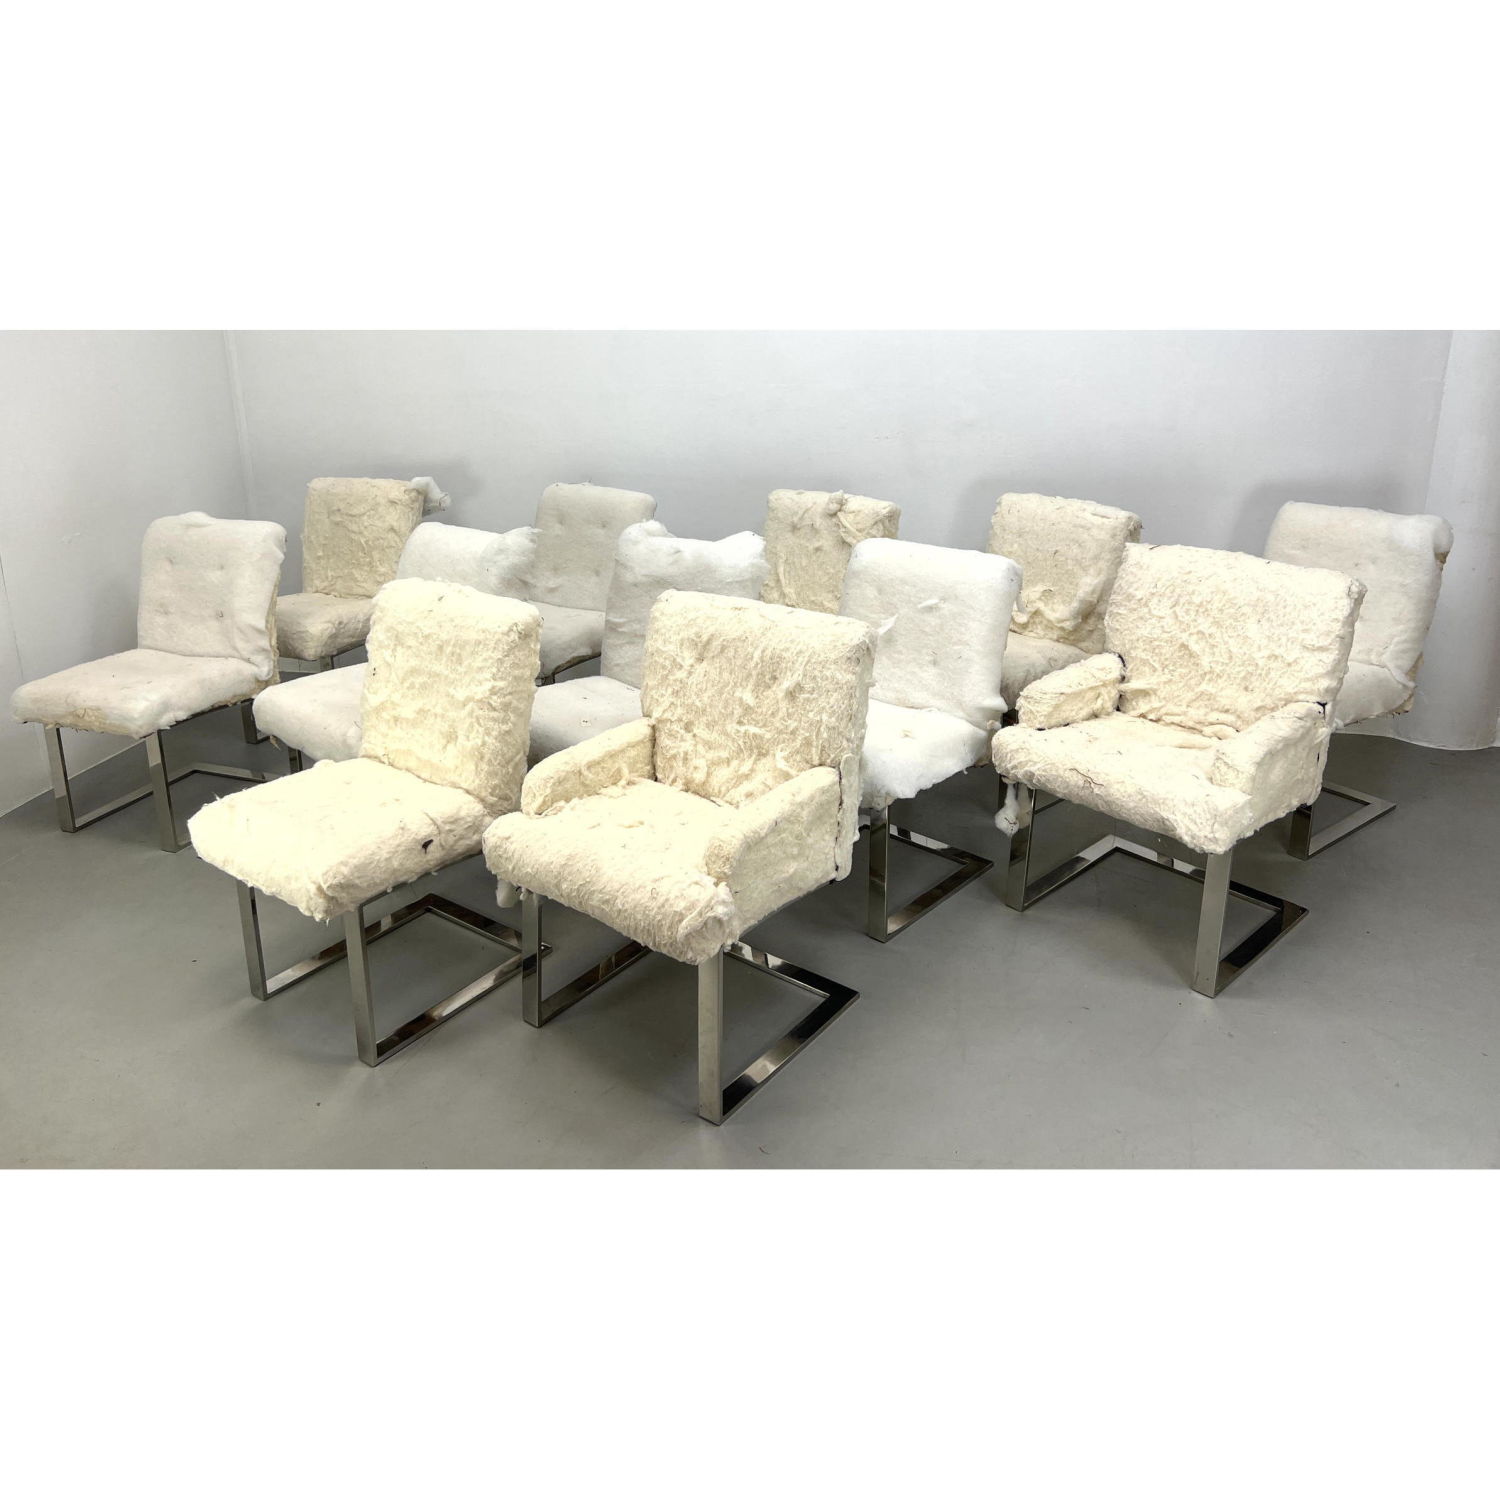 12 Paul Evans Dining chairs. Chrome